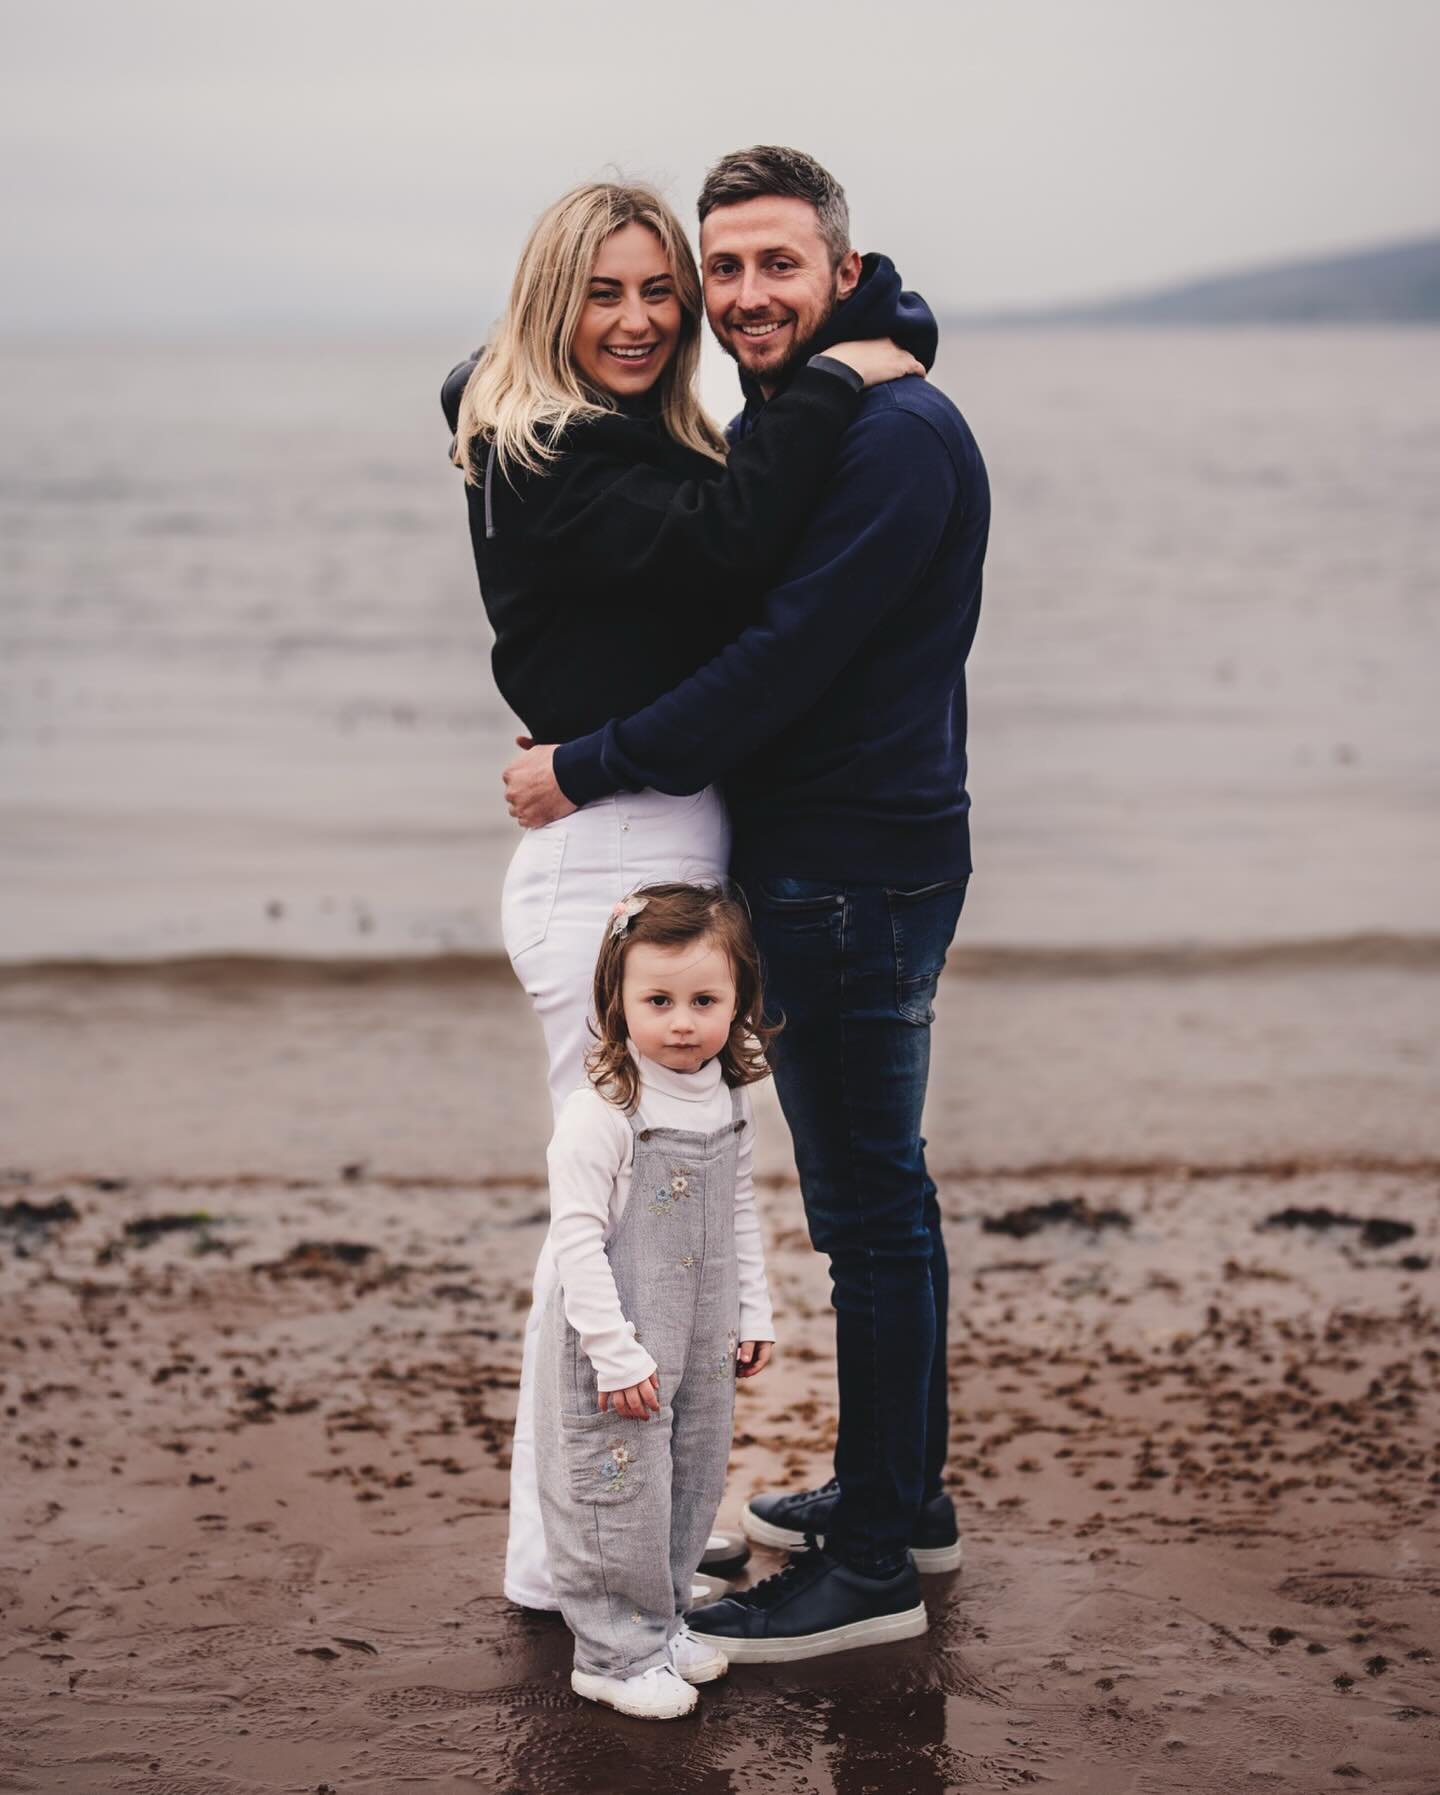 Less than 24 hours to go now for this wee amazing team, Sarah, Conor and their beautiful wee girl Loah as we all get ready for a brilliant day tomorrow for their waddin.

Buzzing for the day, prep, then ceremony at Inverkip Church, then a short hop t